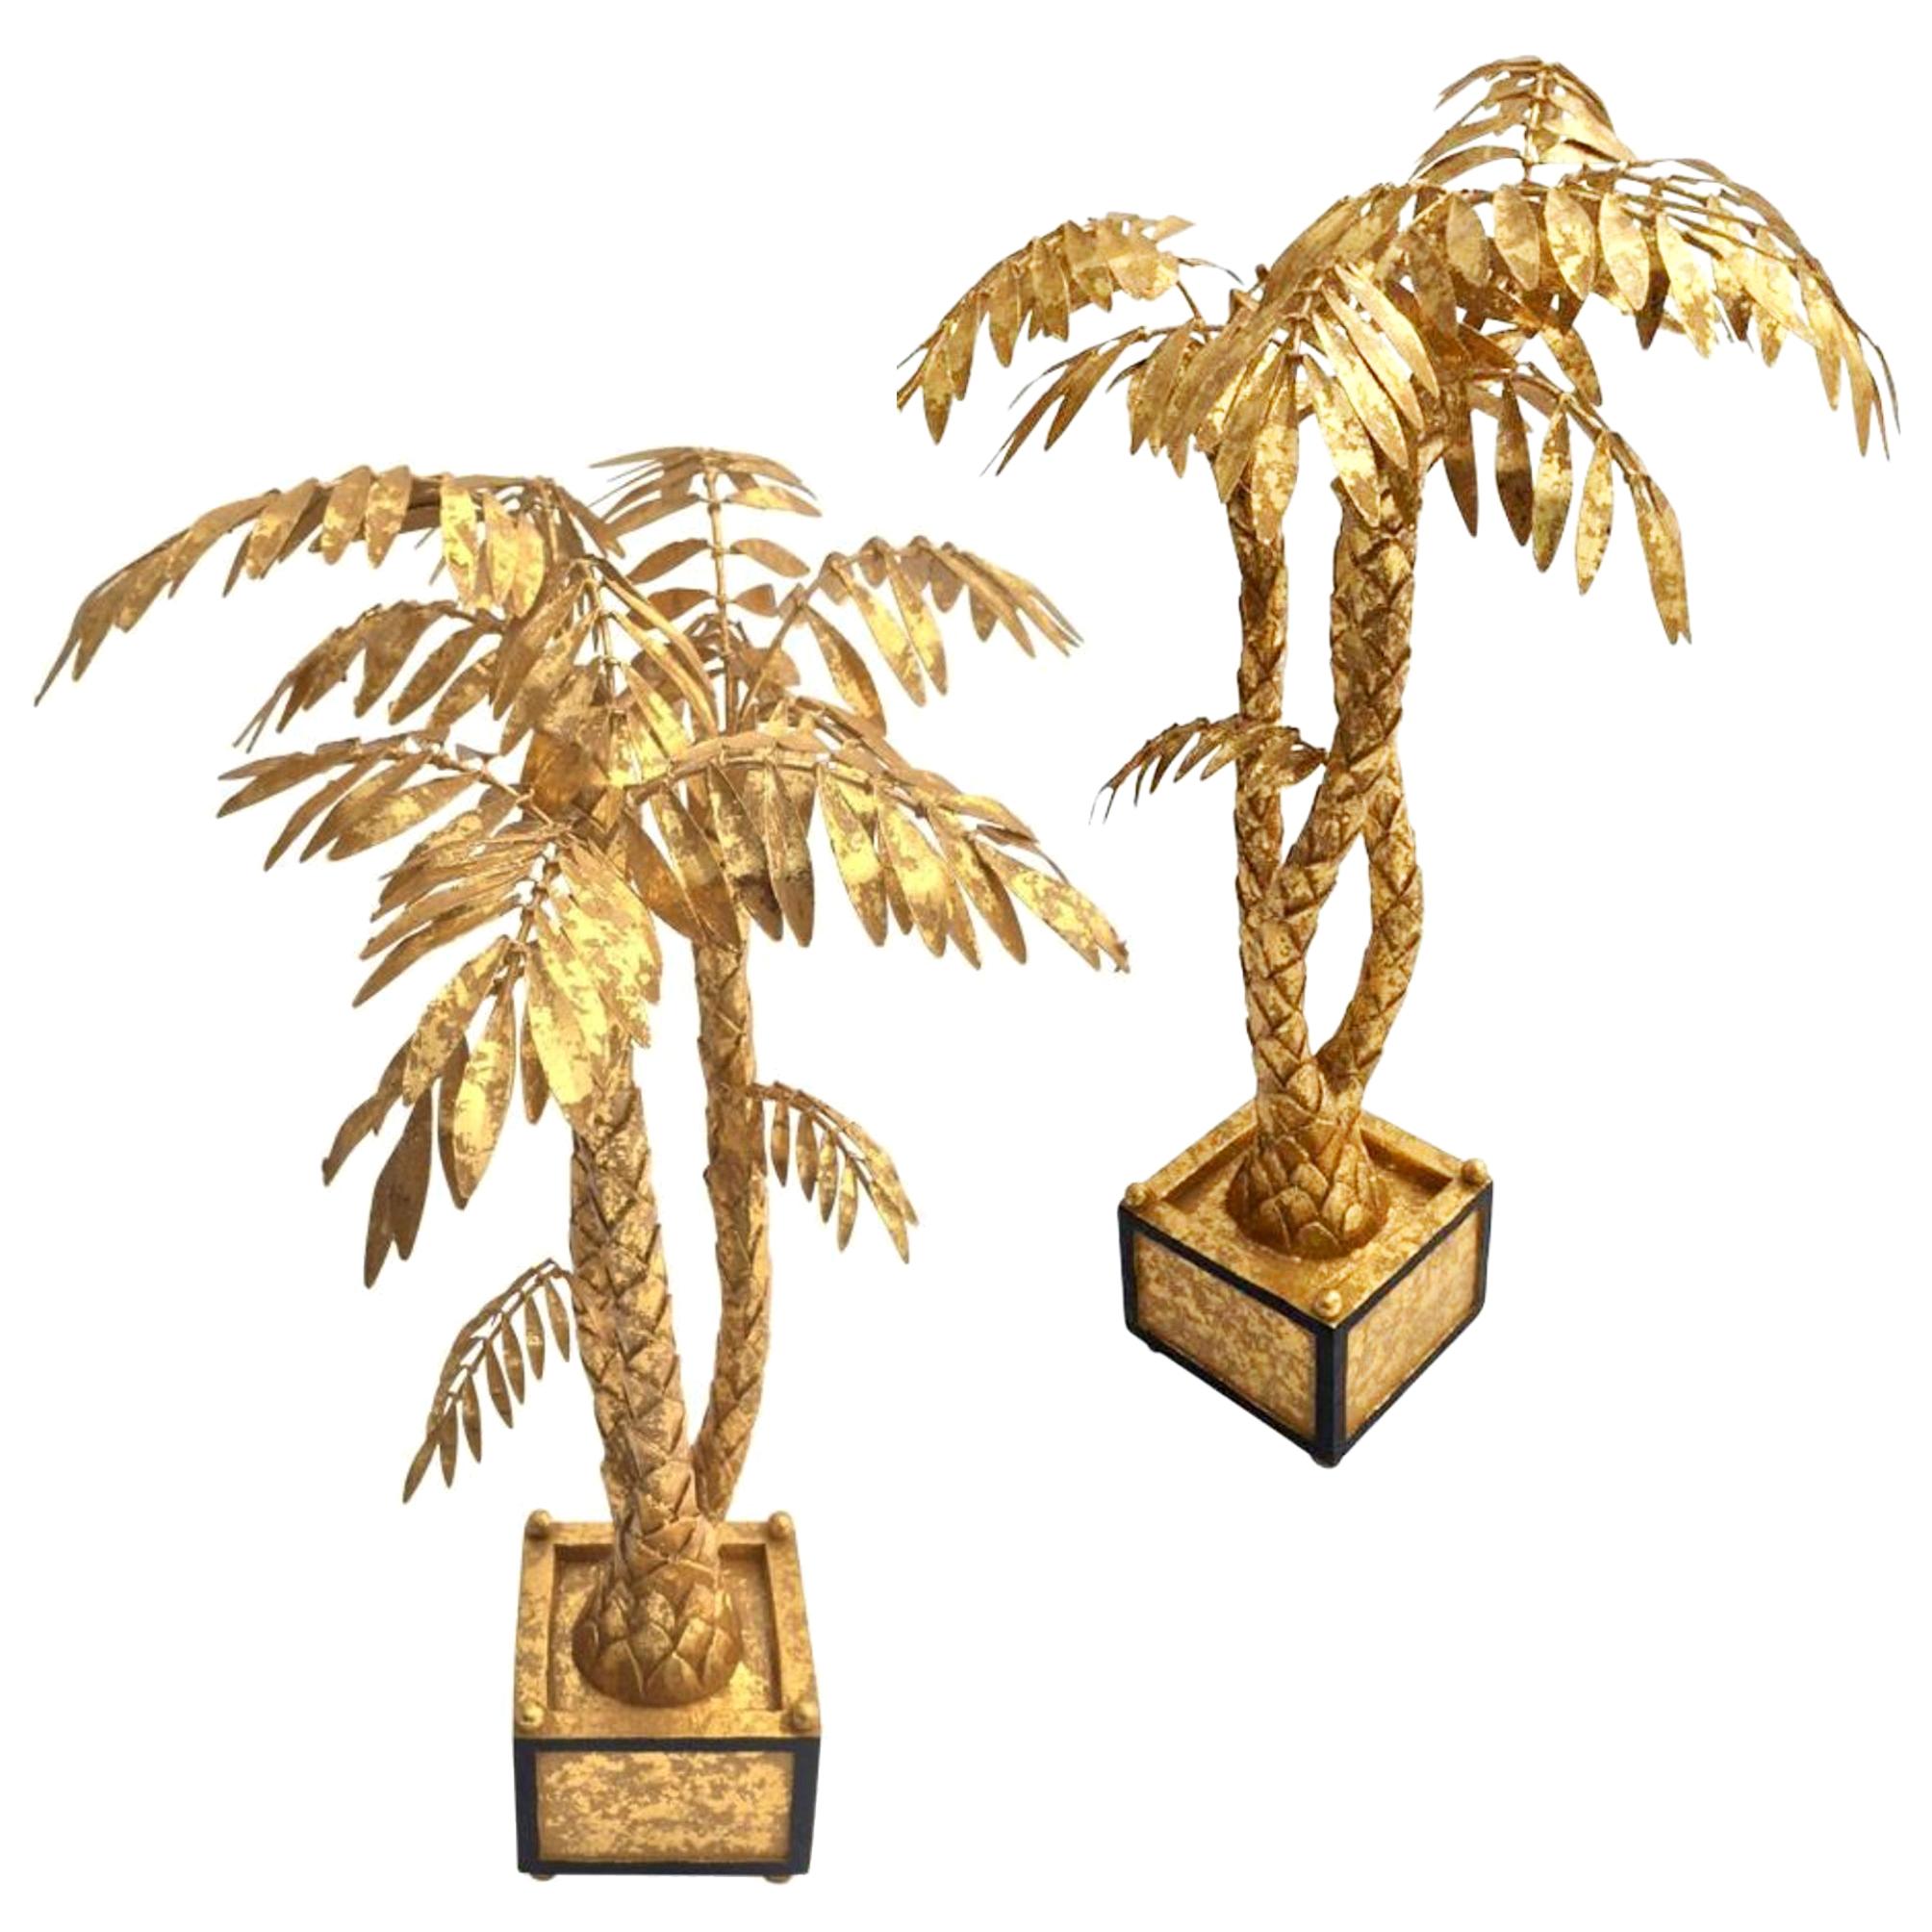 Pair of Gilded Palm Tree Center Piece, Hand Craft Work Elegant and Decorative